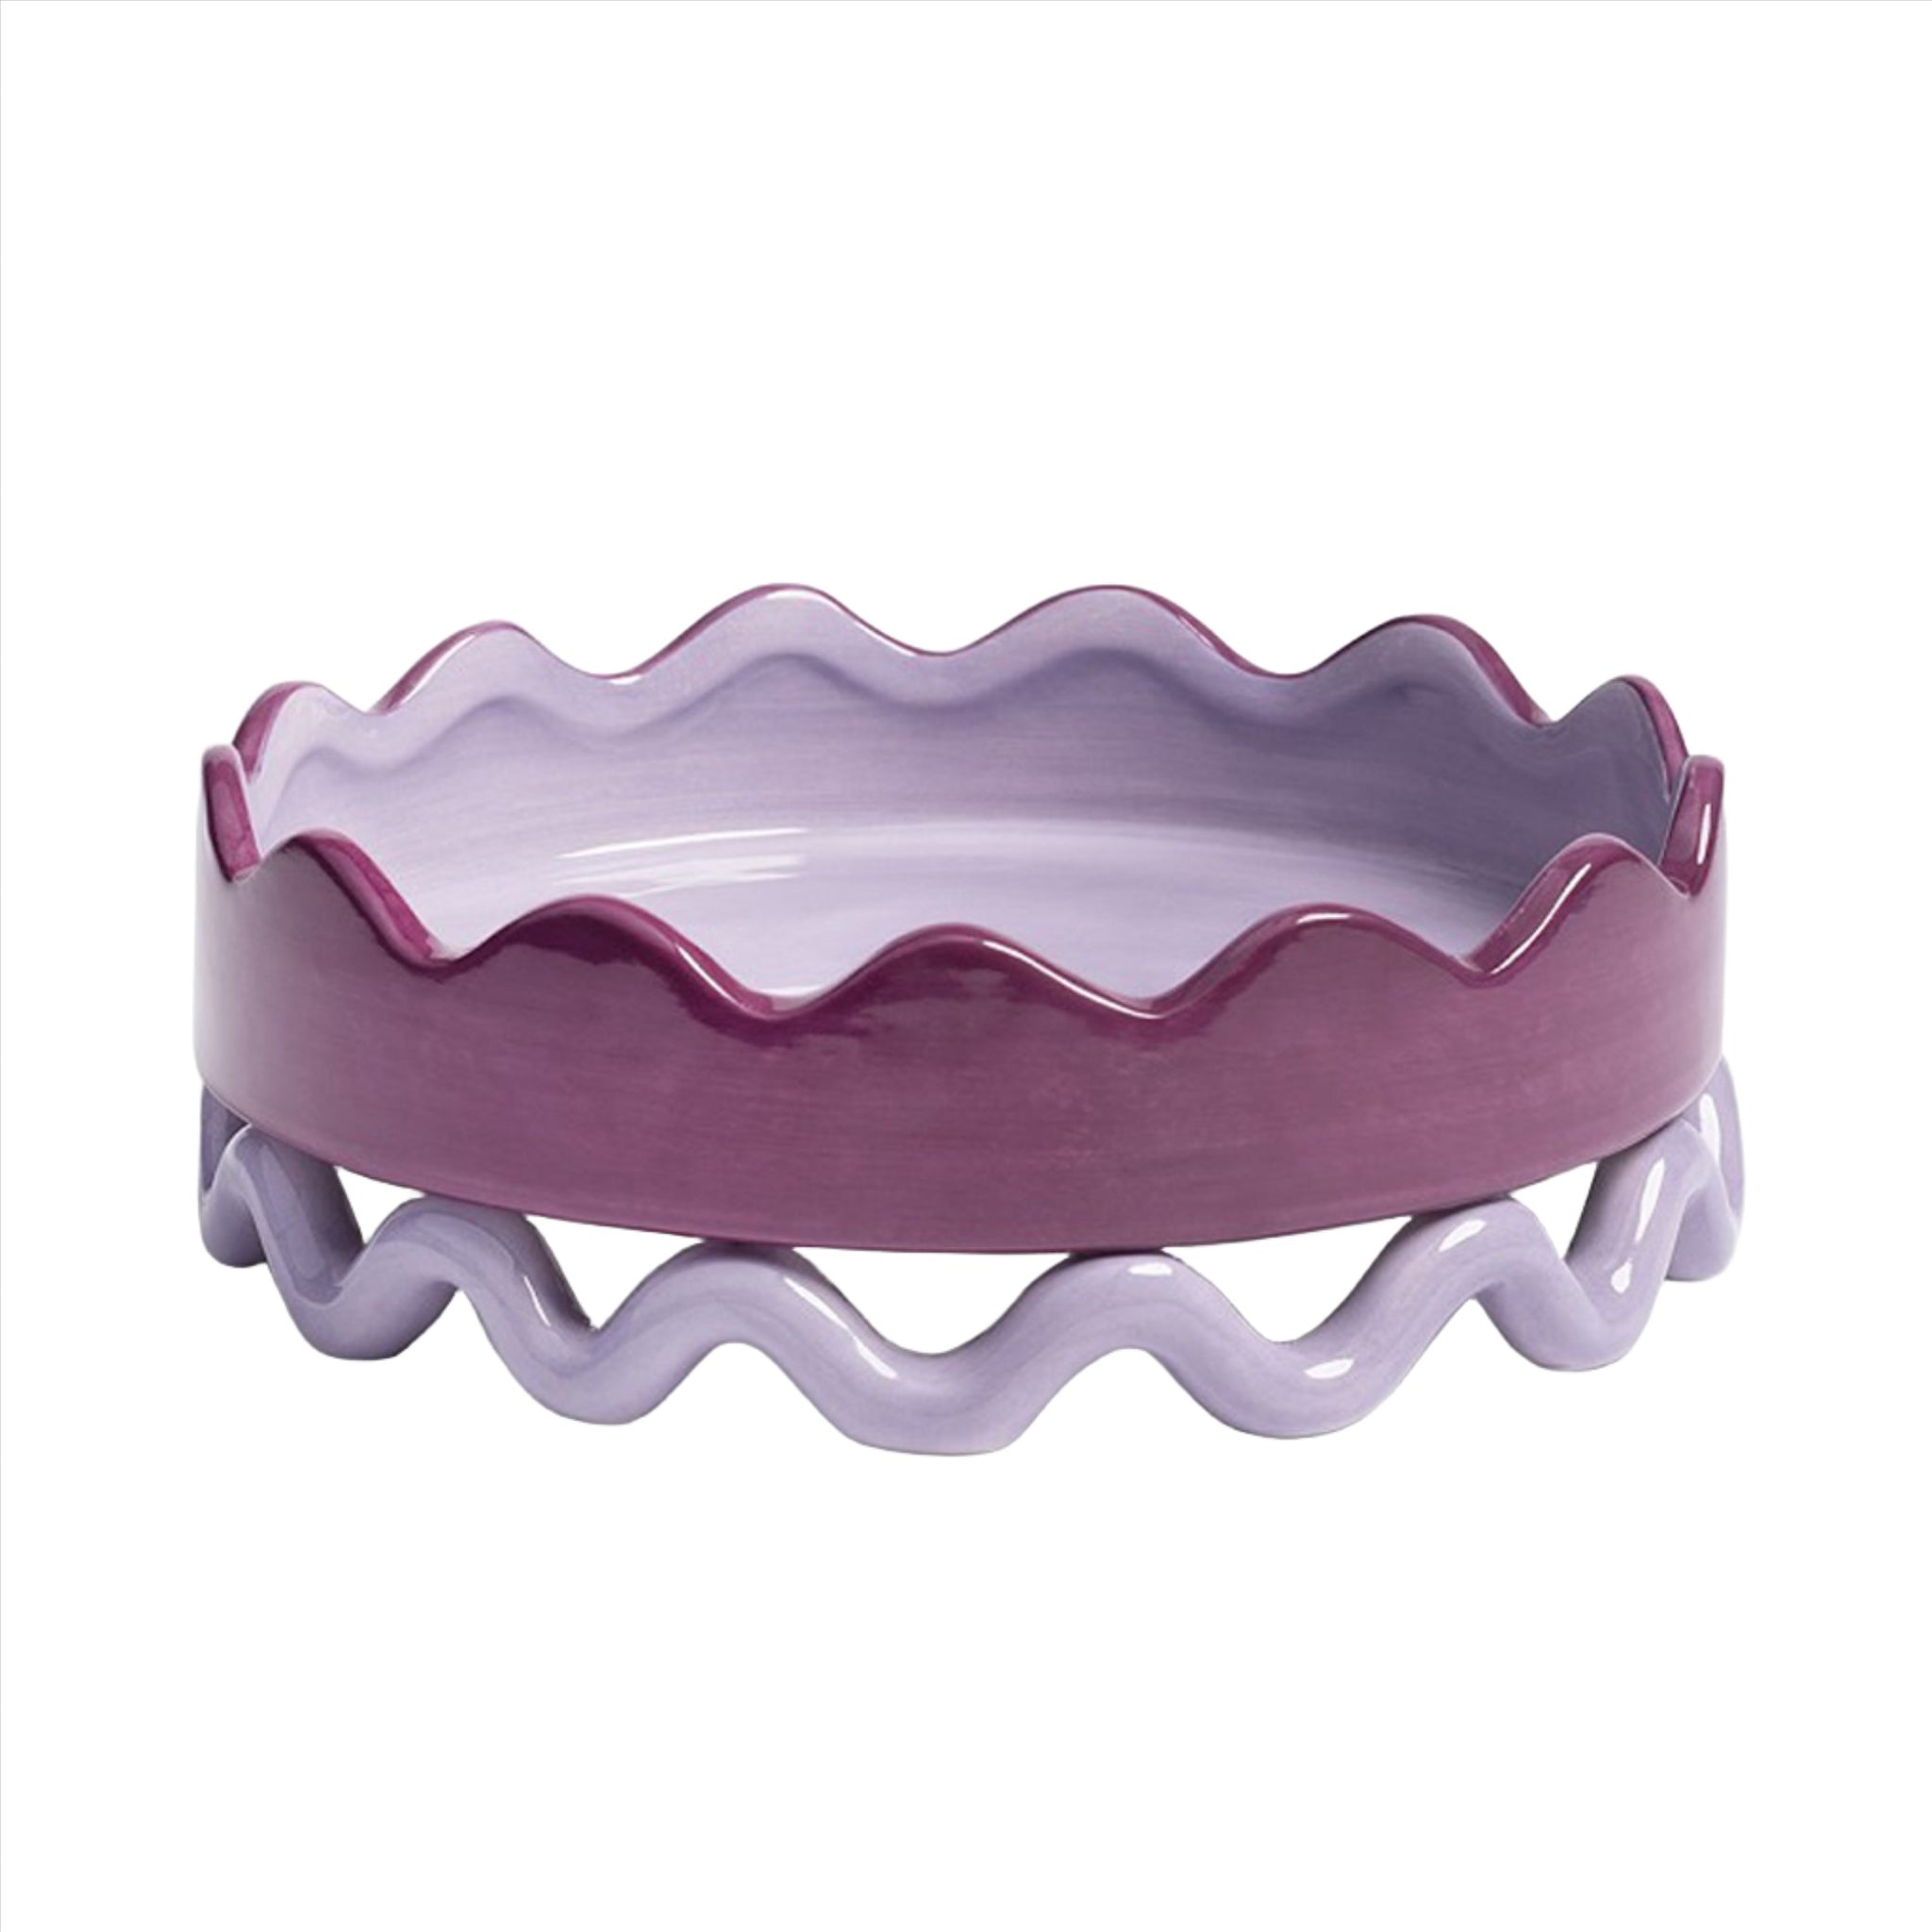 Tray Sway - Purple / Lilac &Klevering